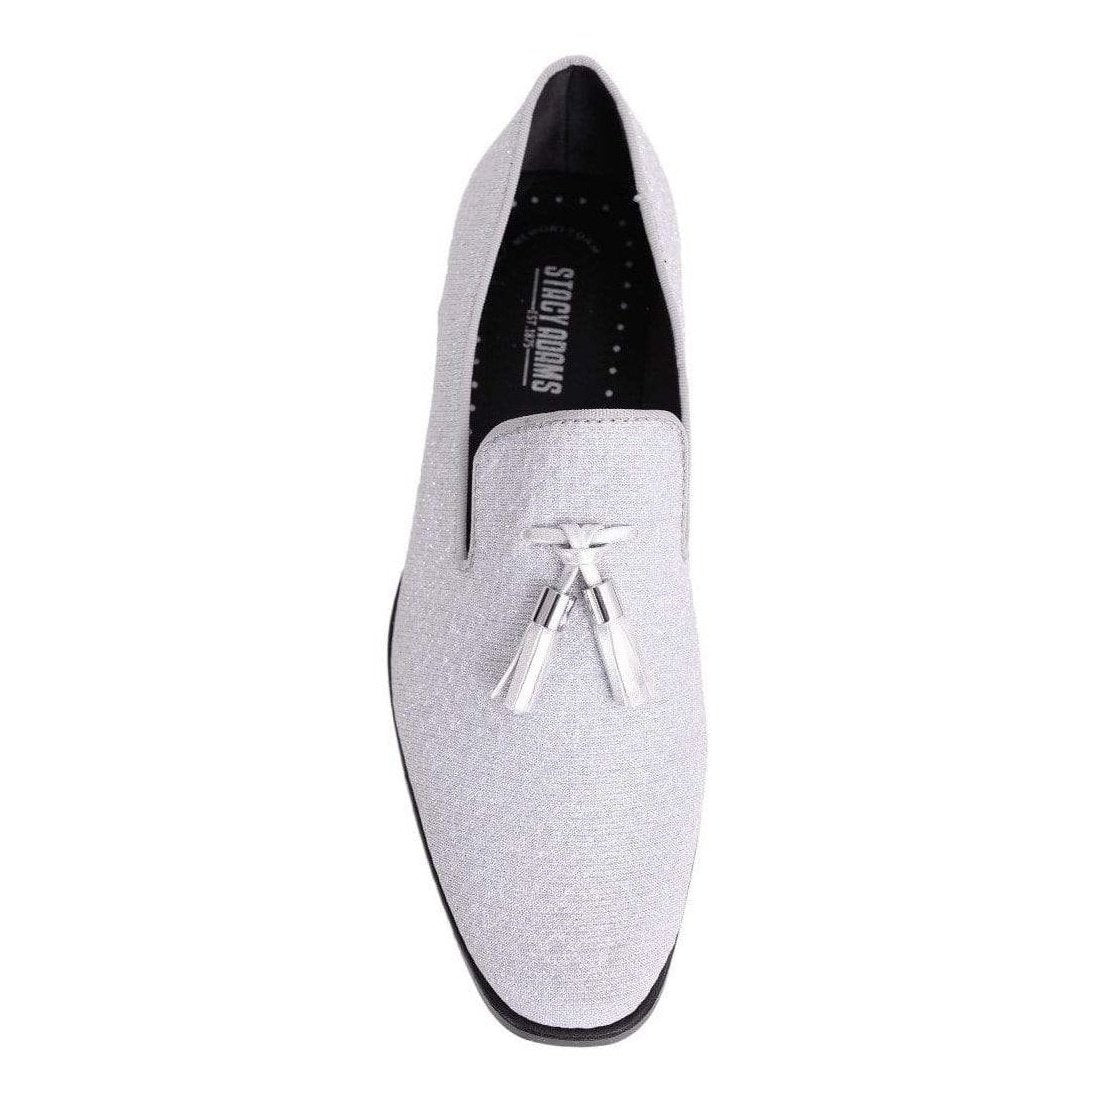 Stacy Adams Swank Tassel Textured Silver Sparkle Slip-on Dress Shoes - The Suit Depot